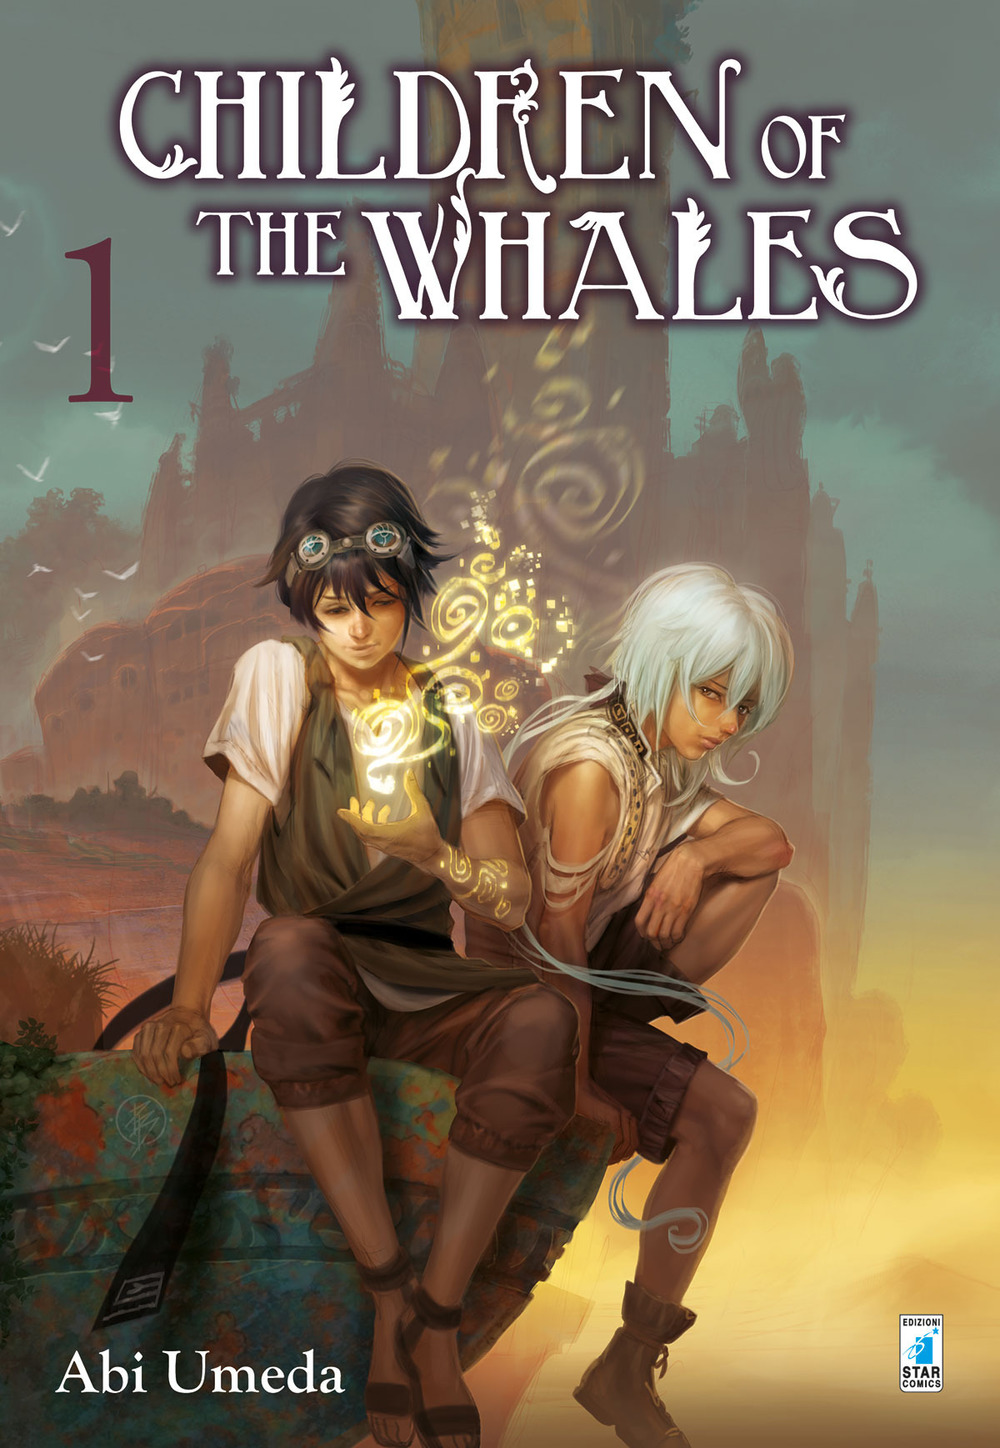 CHILDREN OF THE WHALES N. 1 VARIANT COVER